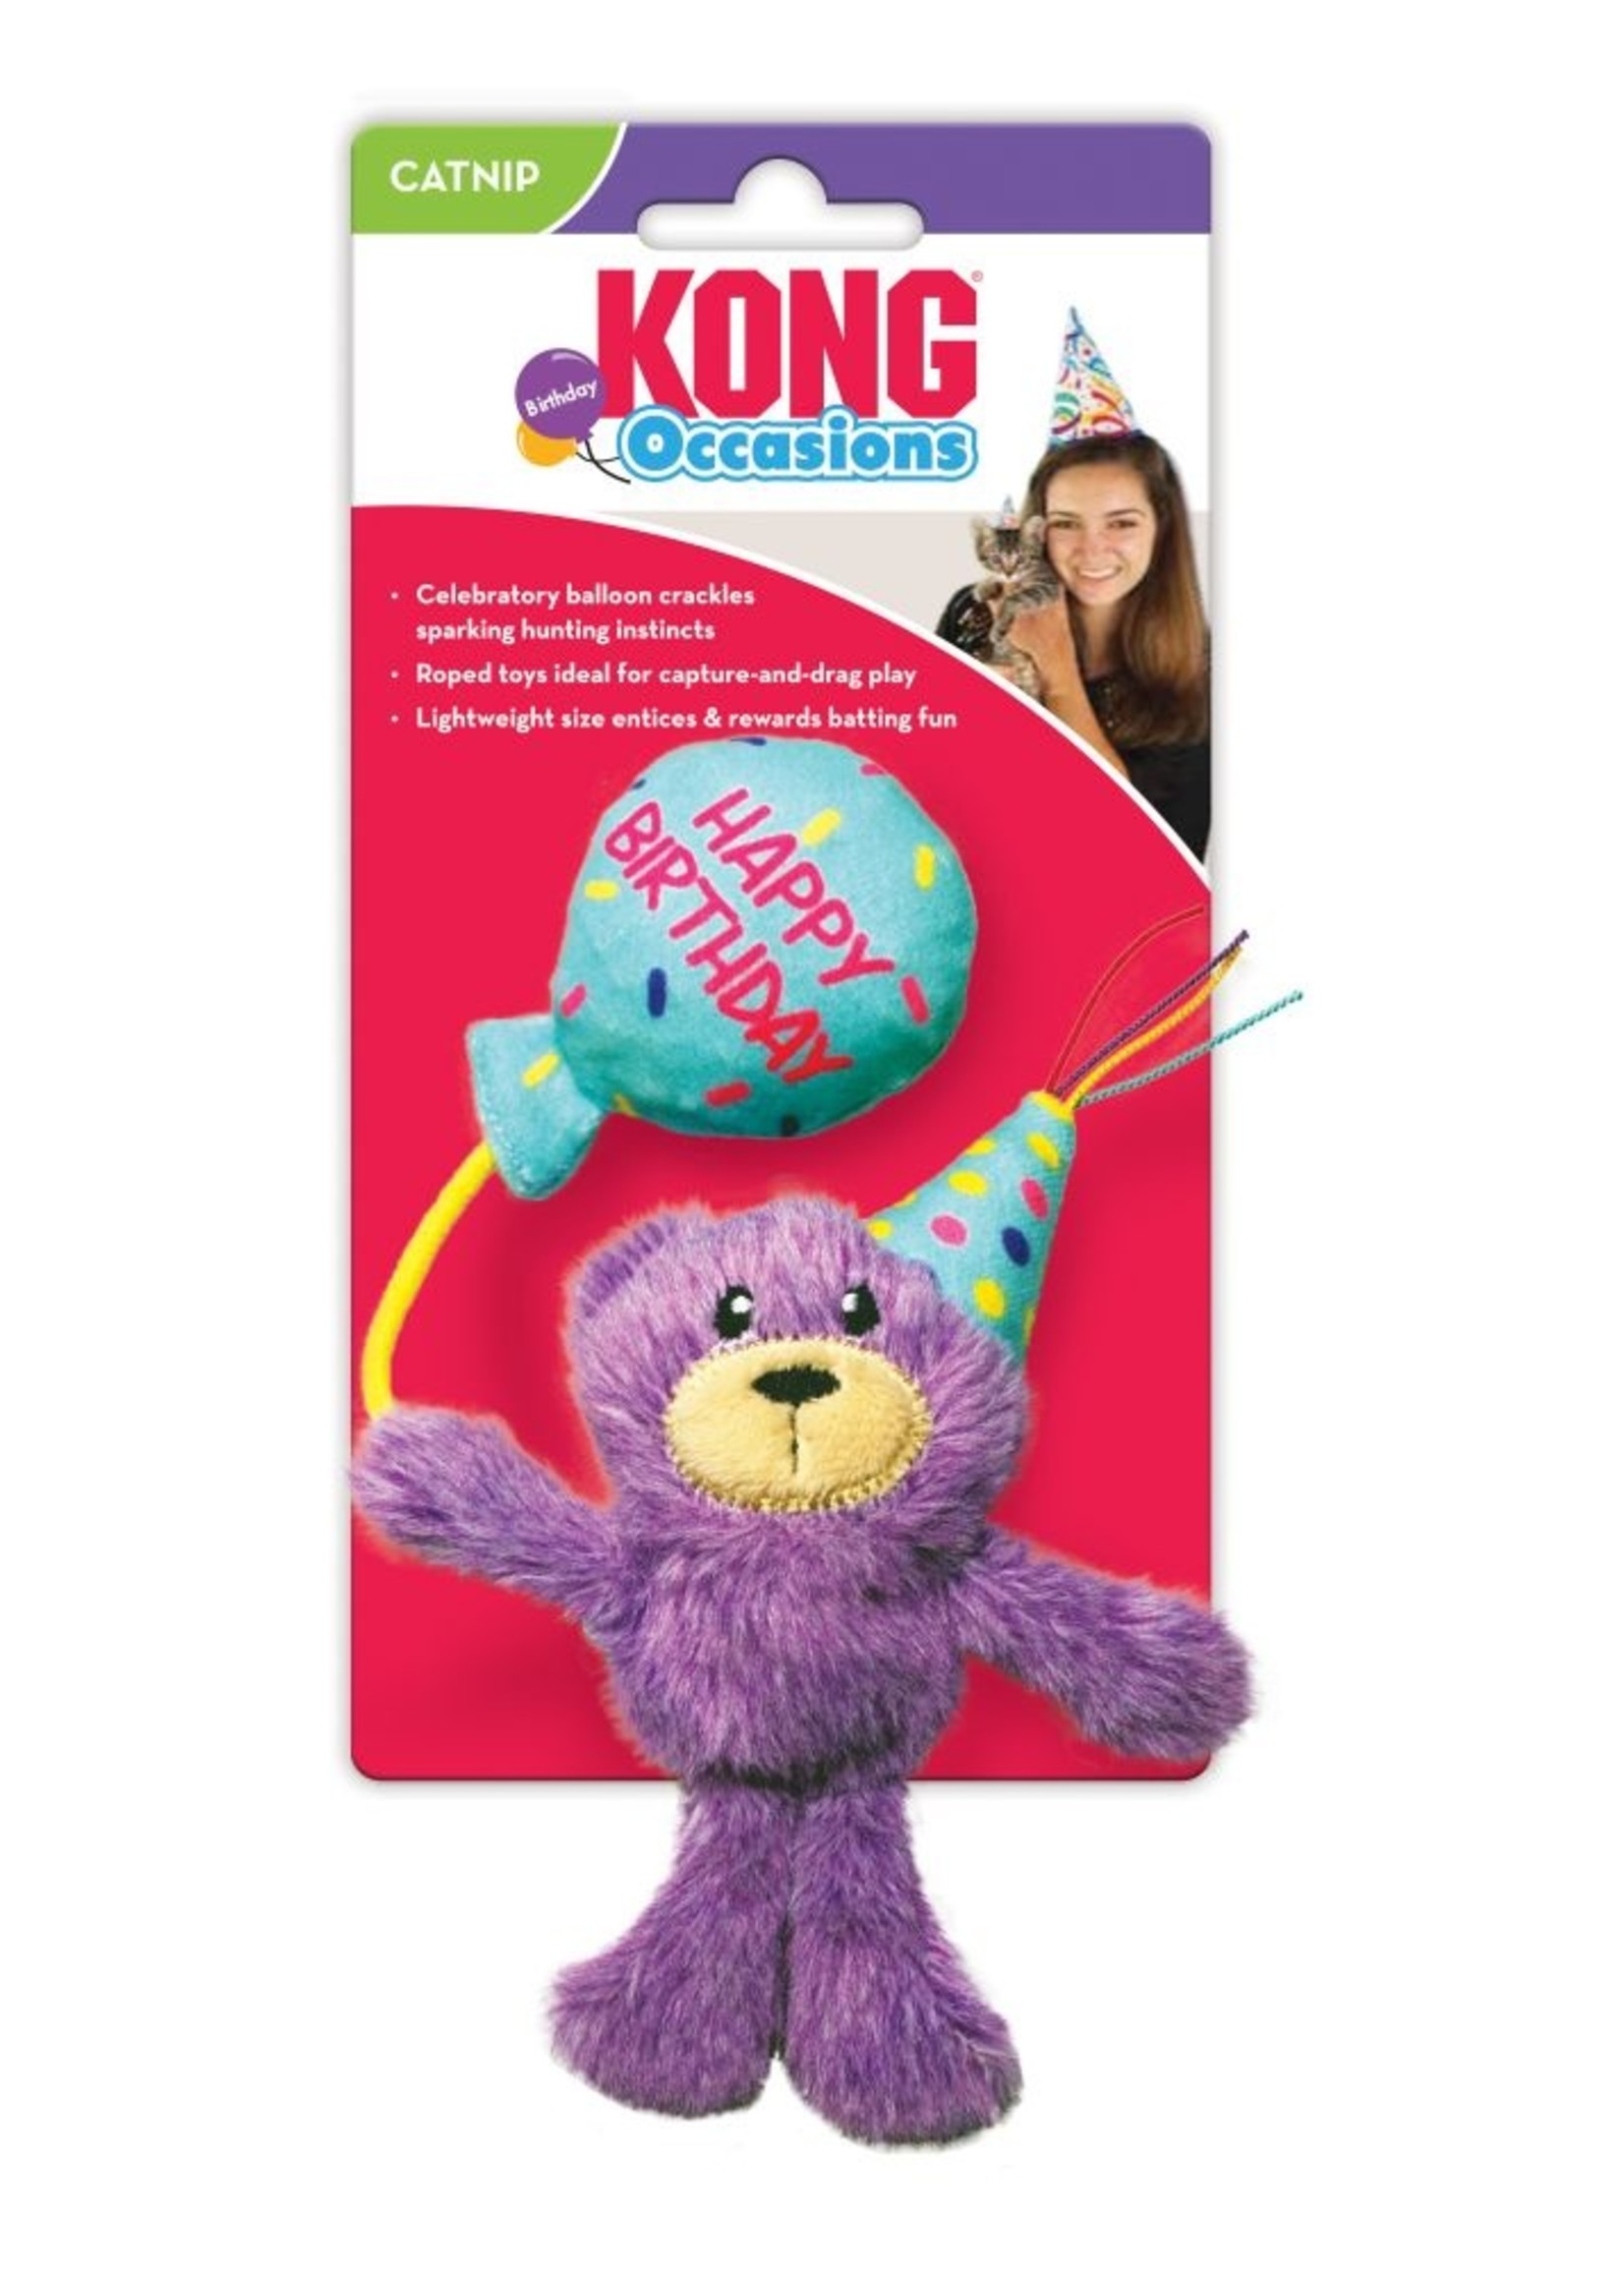 Kong® Cat Occasions Bday Teddy